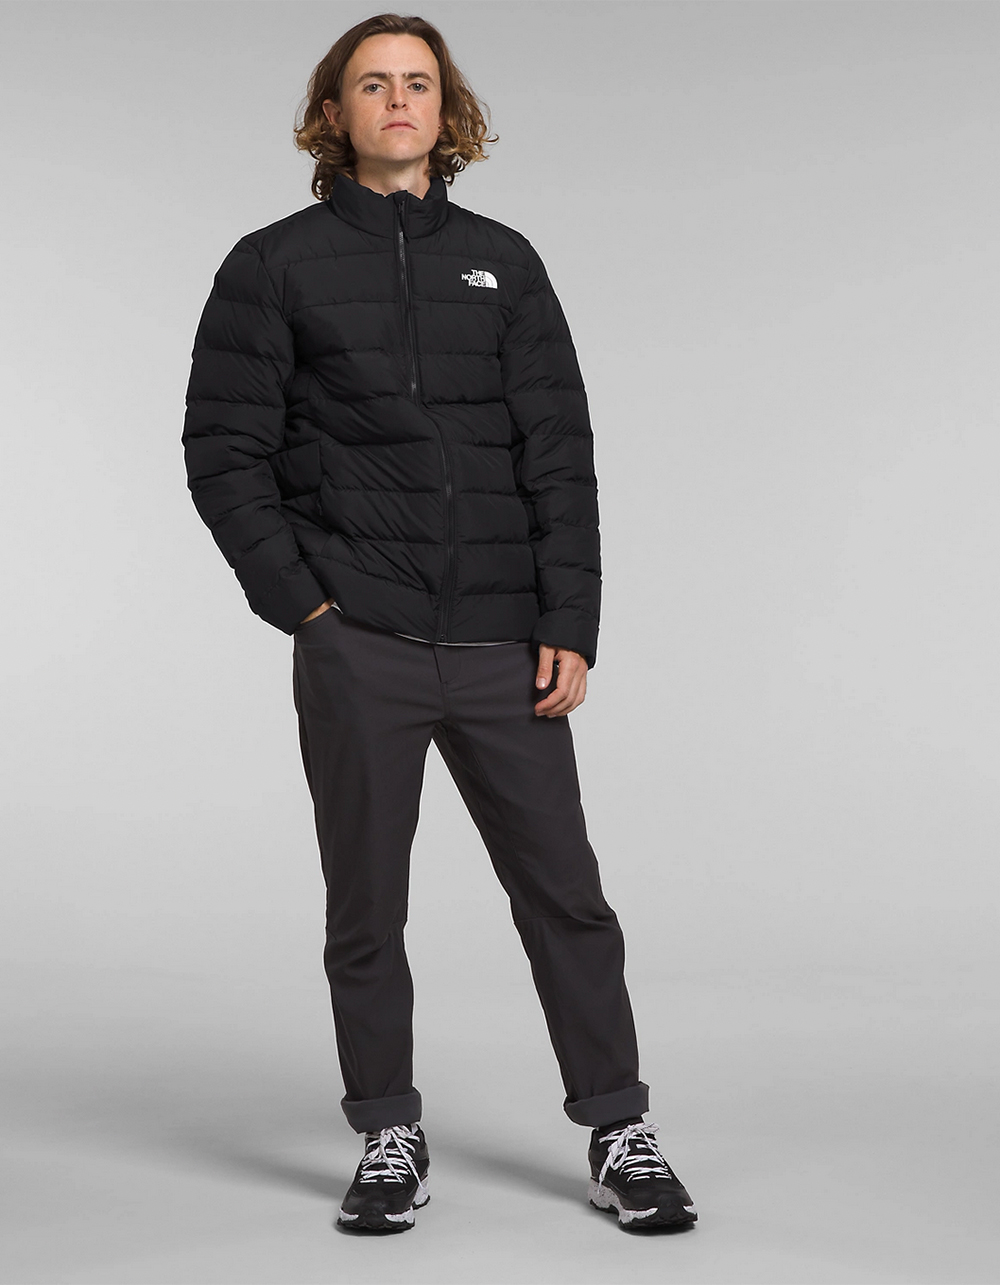 THE NORTH FACE Aconcagua 3 Mens Puffer Jacket - BLACK | Tillys